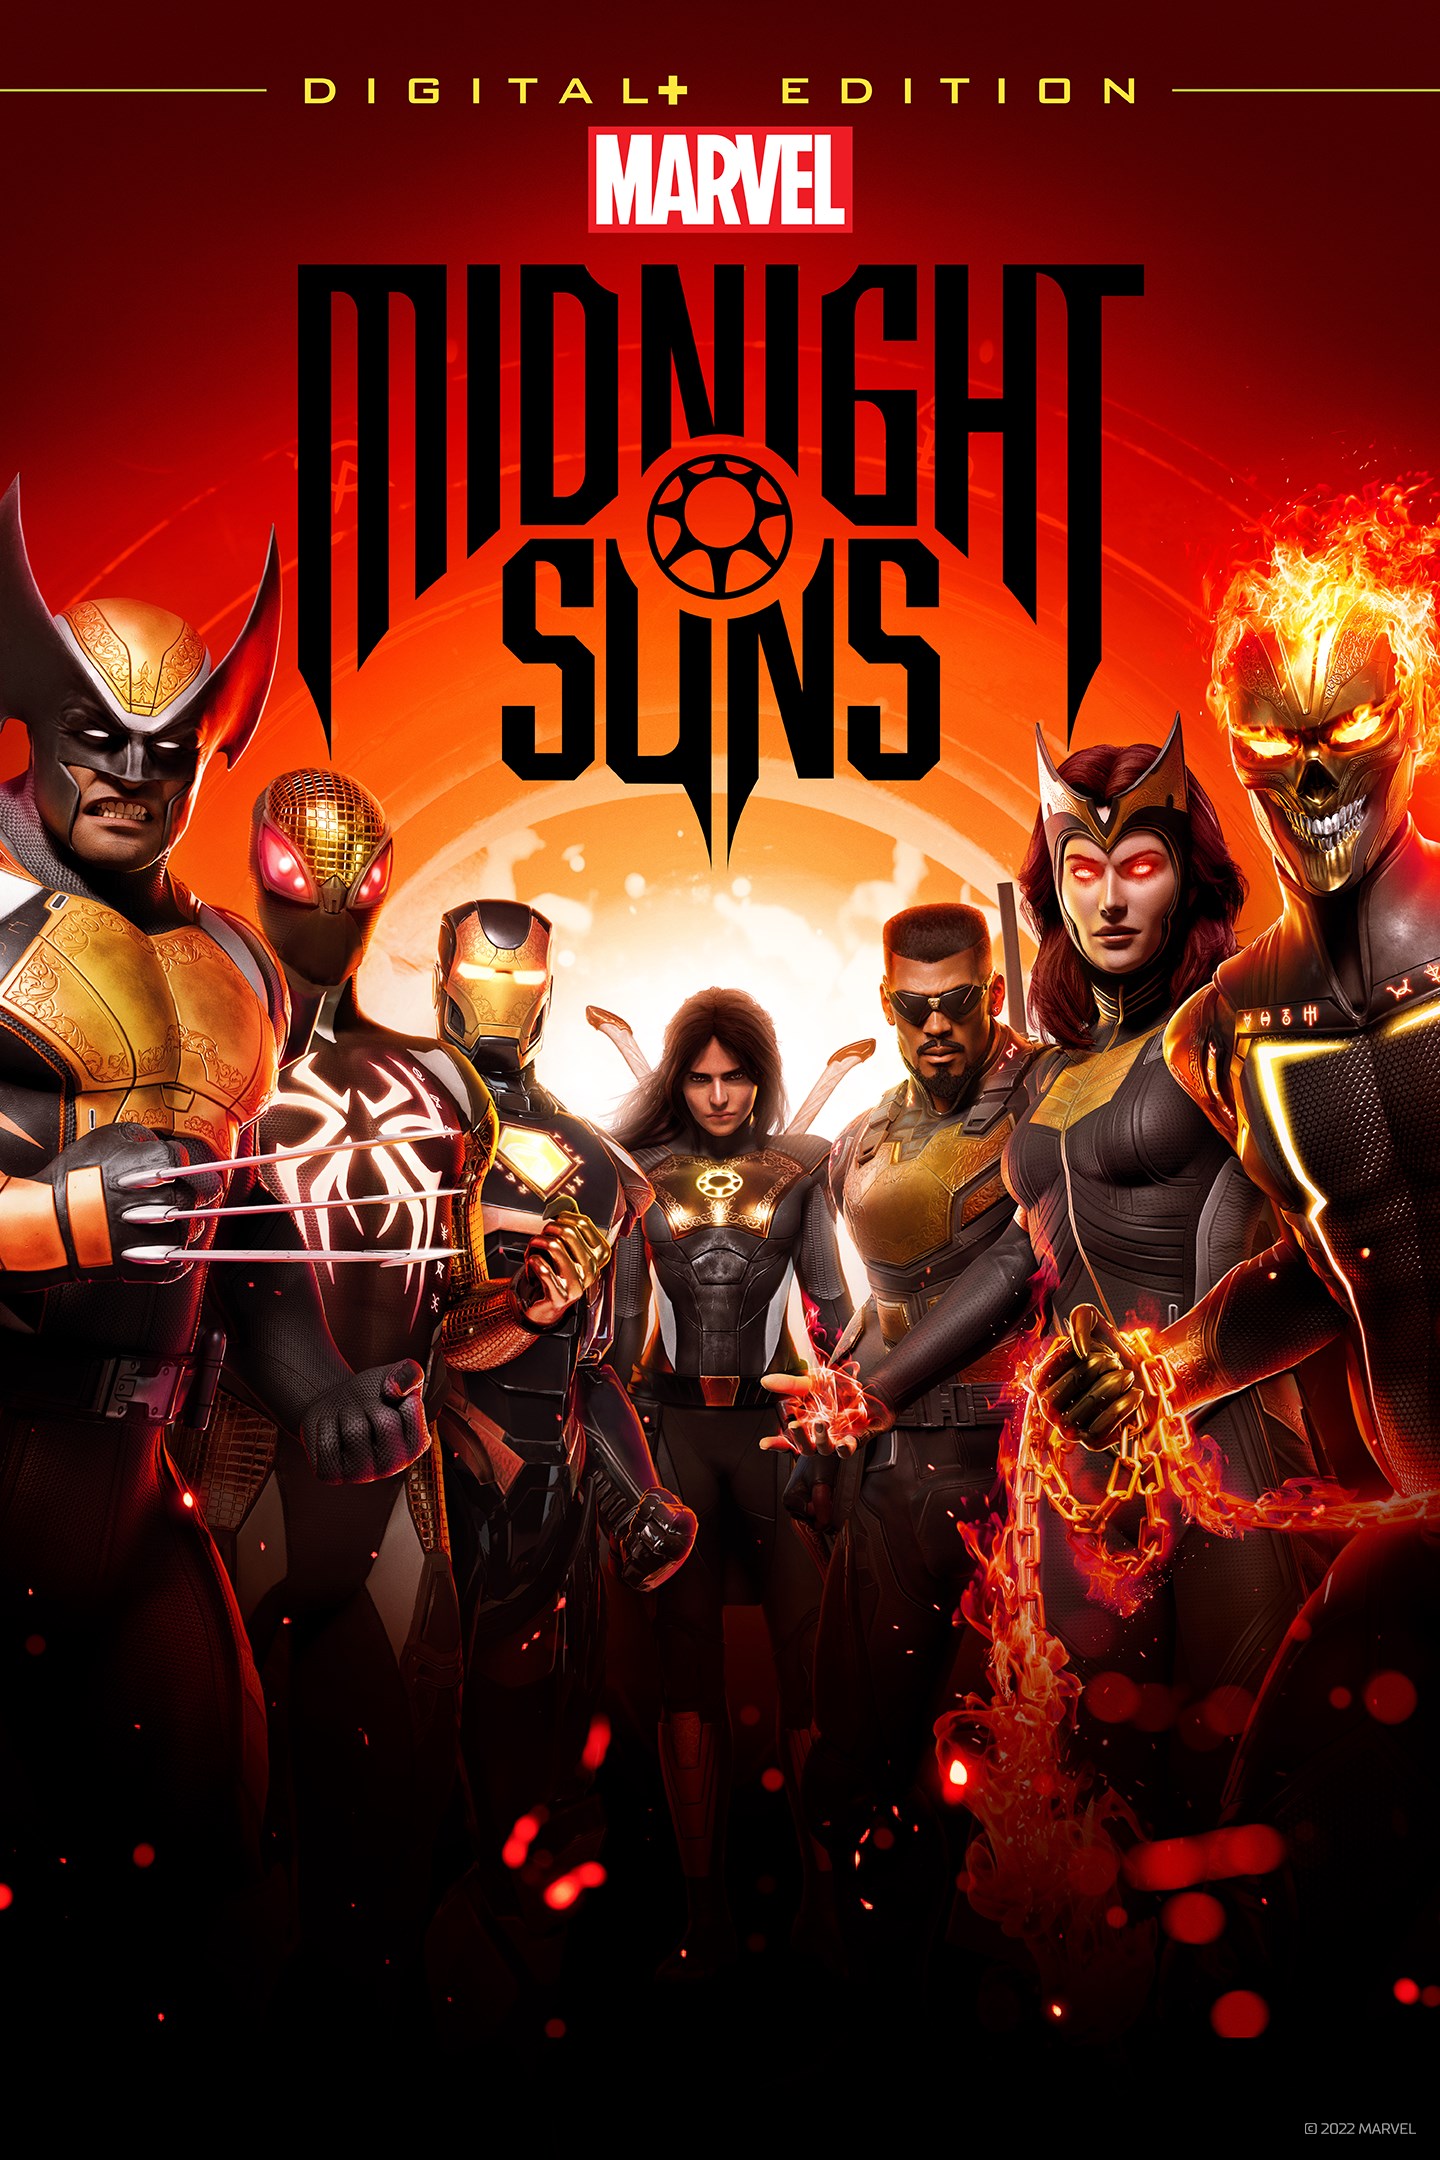 Marvel S Midnight Suns Digital Edition For Xbox Series X S On Xbox Series X S Price